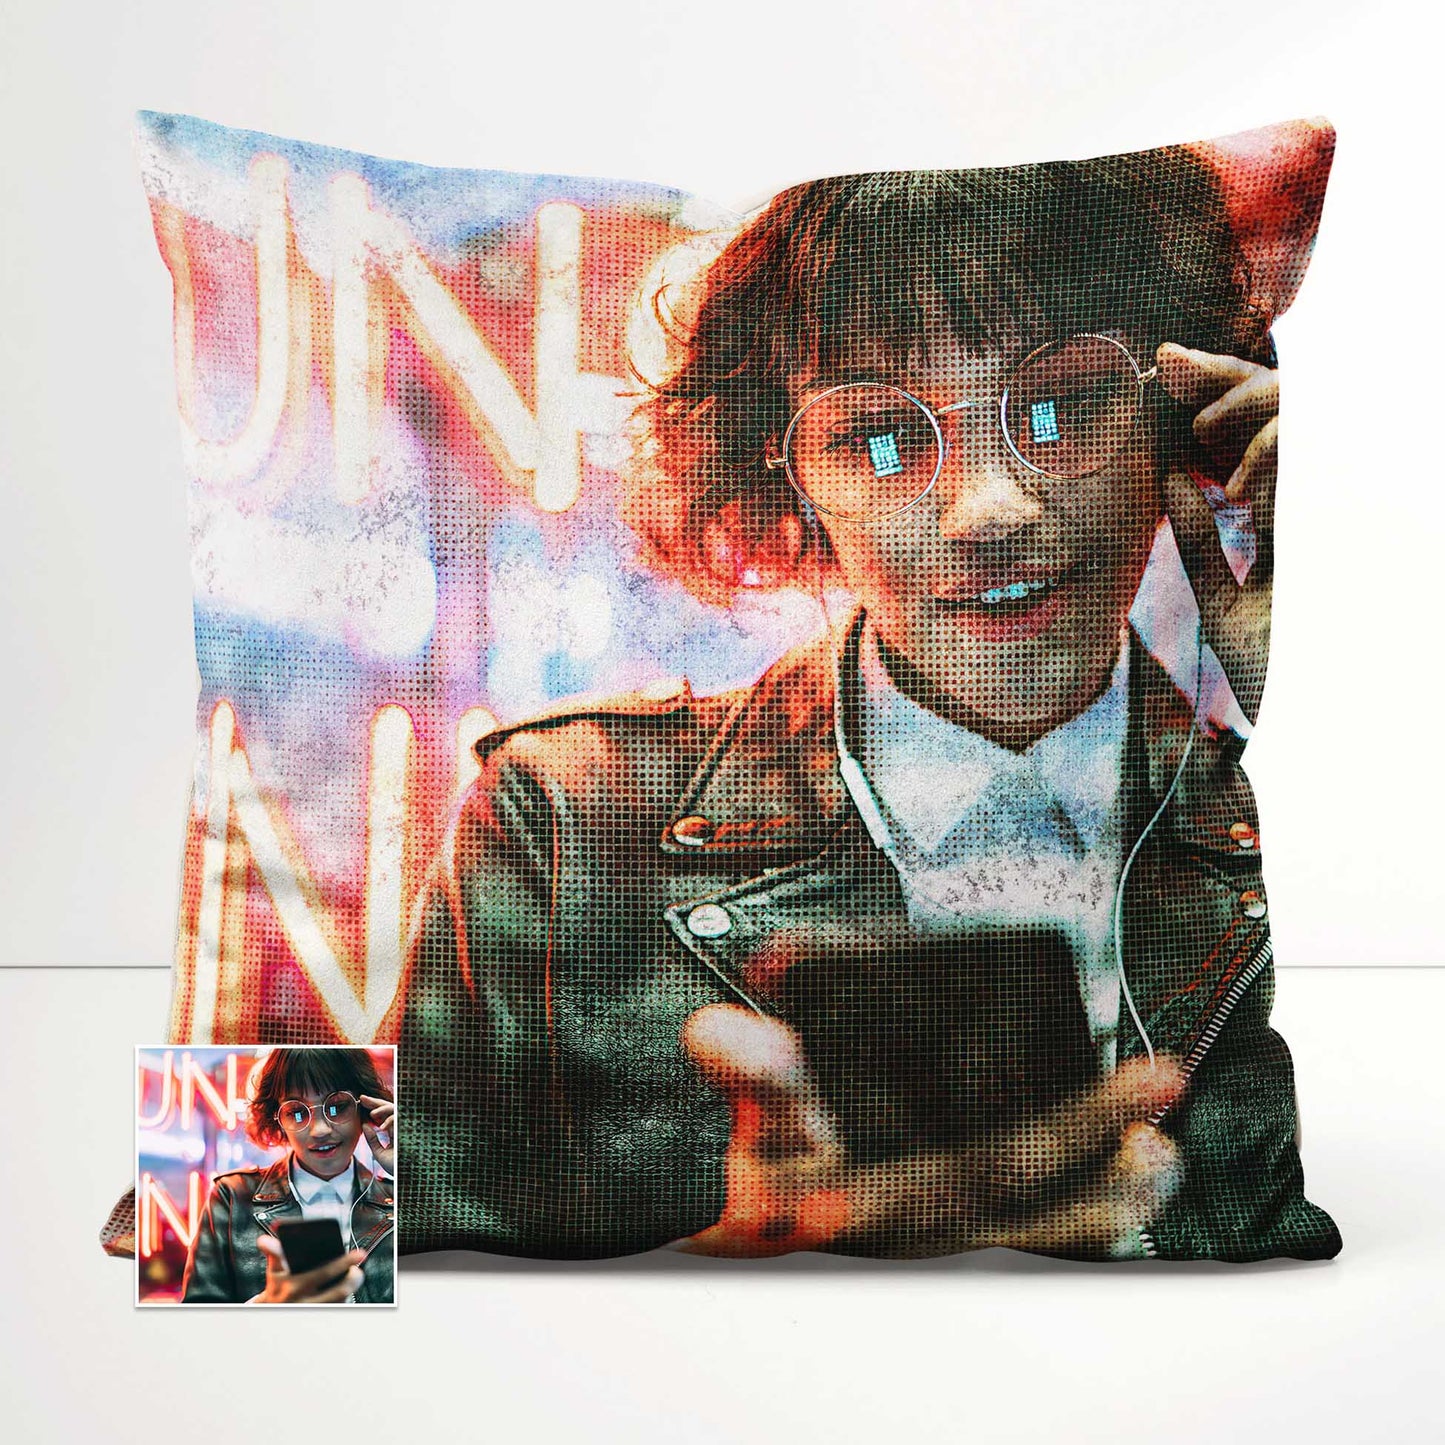 Add a touch of artistic flair to your interior design with the Personalised Grunge FX Cushion. Featuring a distressed print from your photo, this cushion offers a unique and creative way to display your favorite artwork, handmade